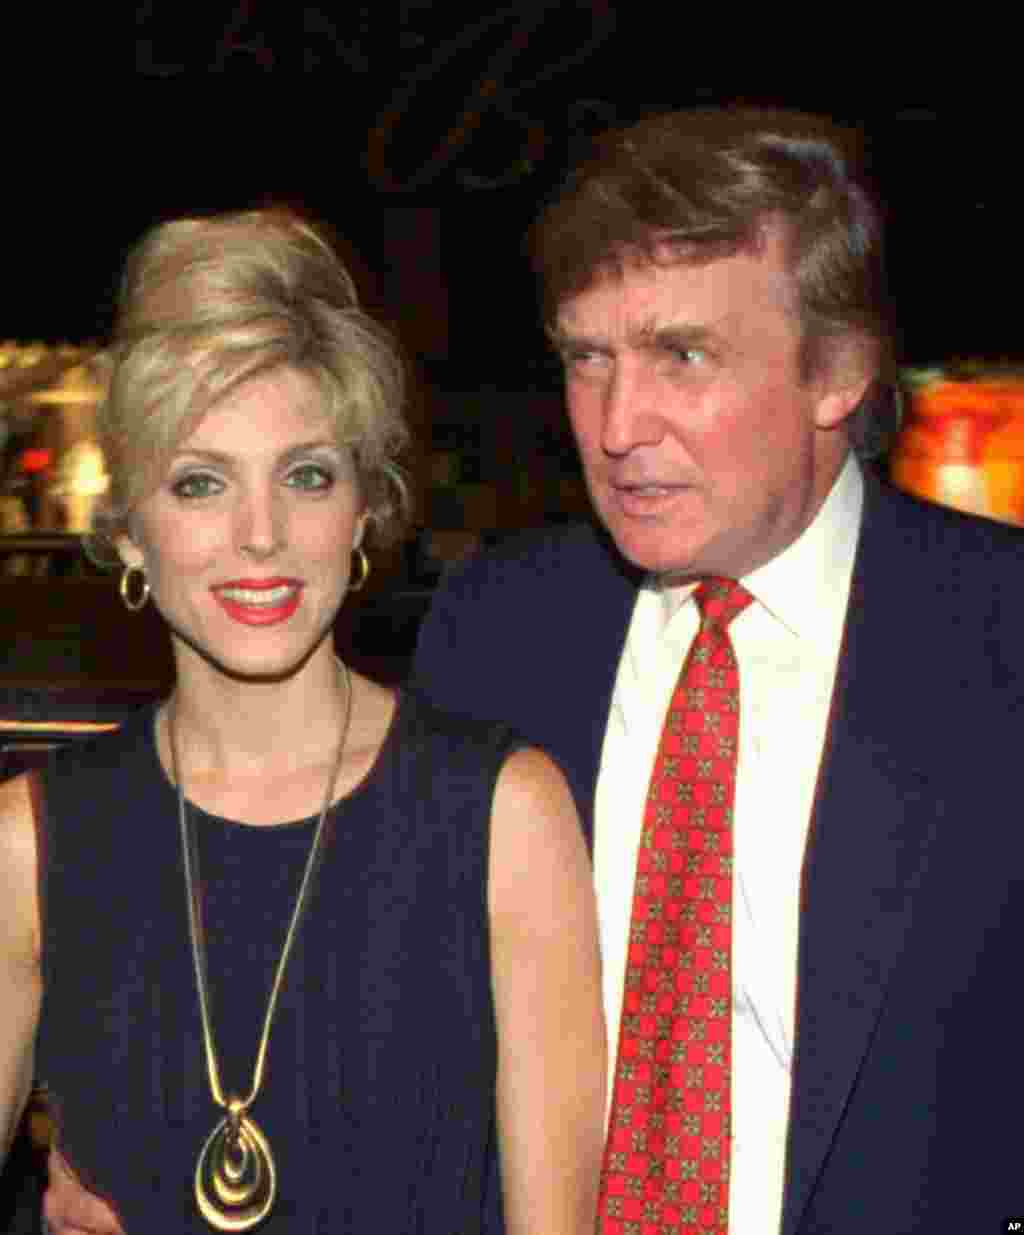 Donald Trump and wife, Marla Maples, are shown in this Aug. 23, 1994 photo. (AP Photo/John Bazemore)